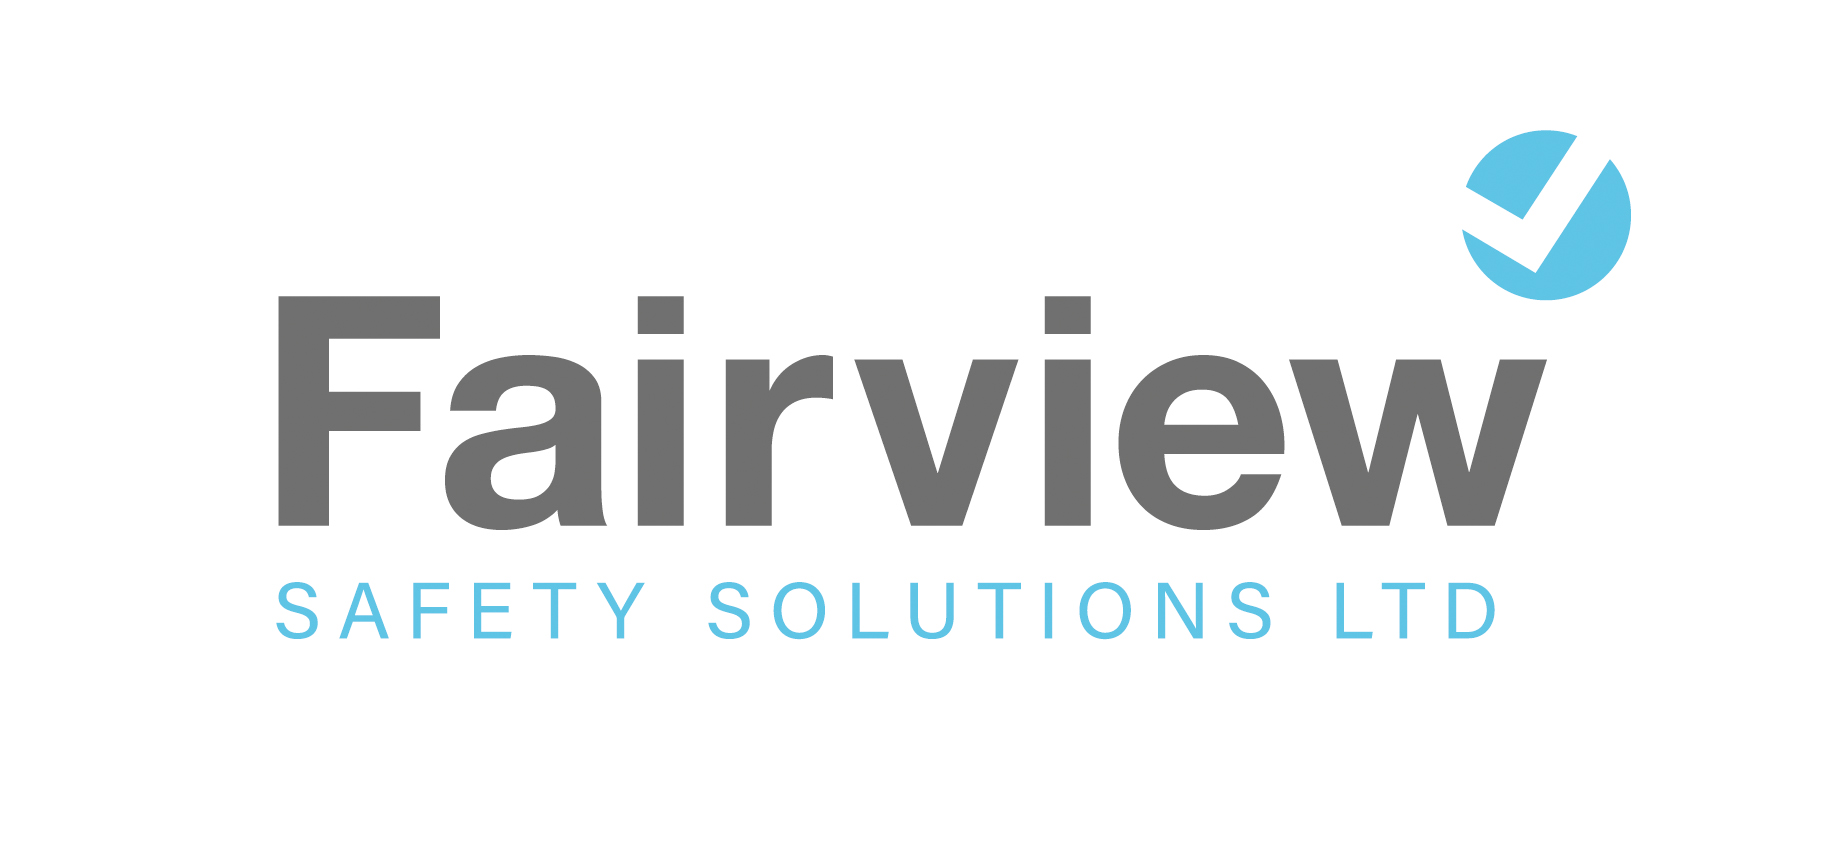 Fairview Safety Solutions company logo